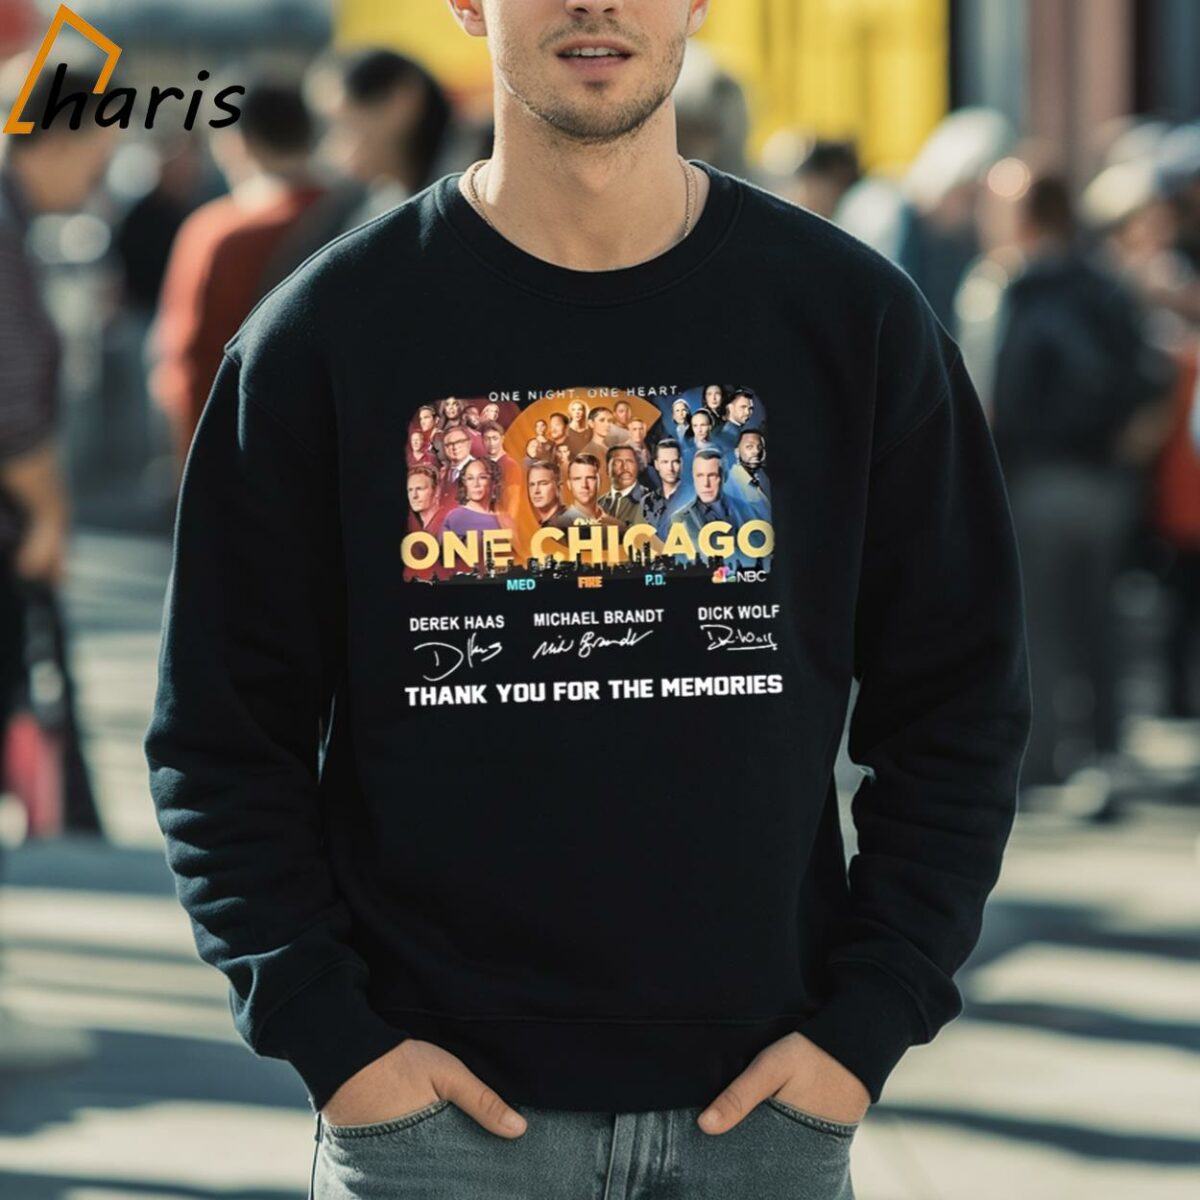 One Night One Heart One Chicago Members Thank You For The Memories T Shirt 5 sweatshirt